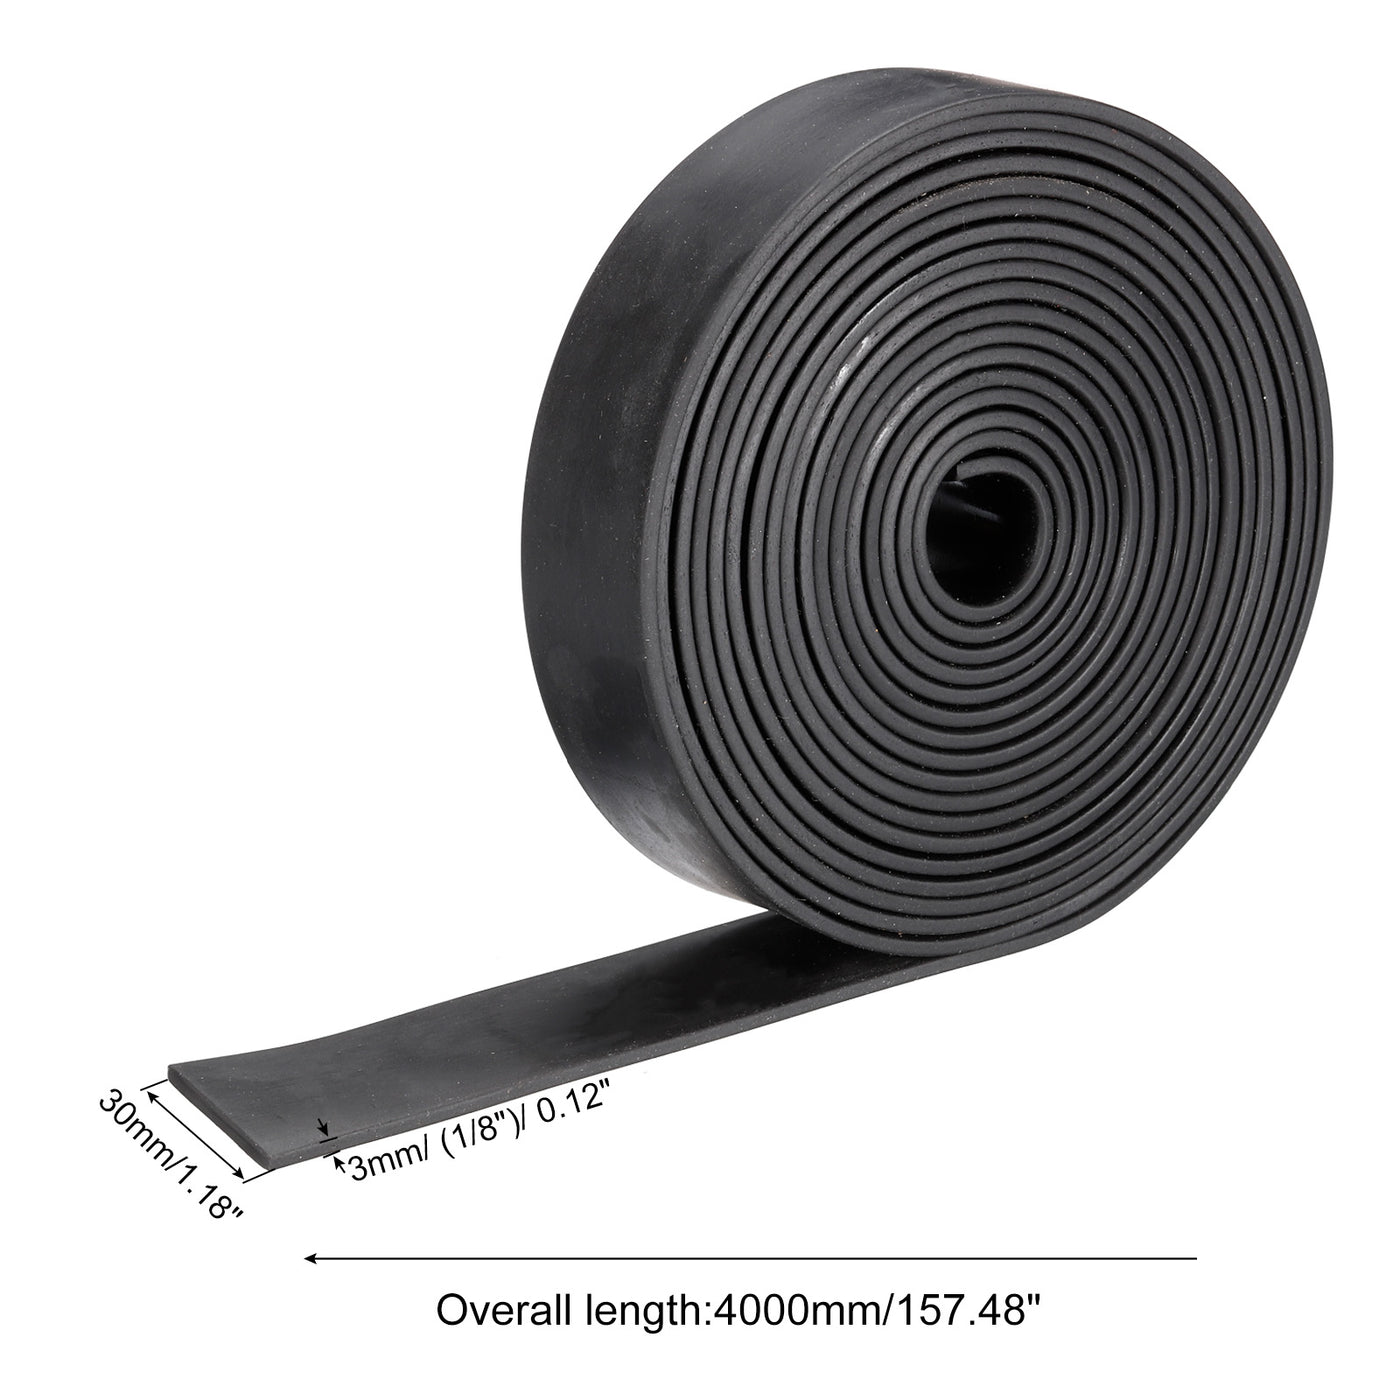 uxcell Uxcell Solid Rubber Strips, Neoprene Sheets Rolls,